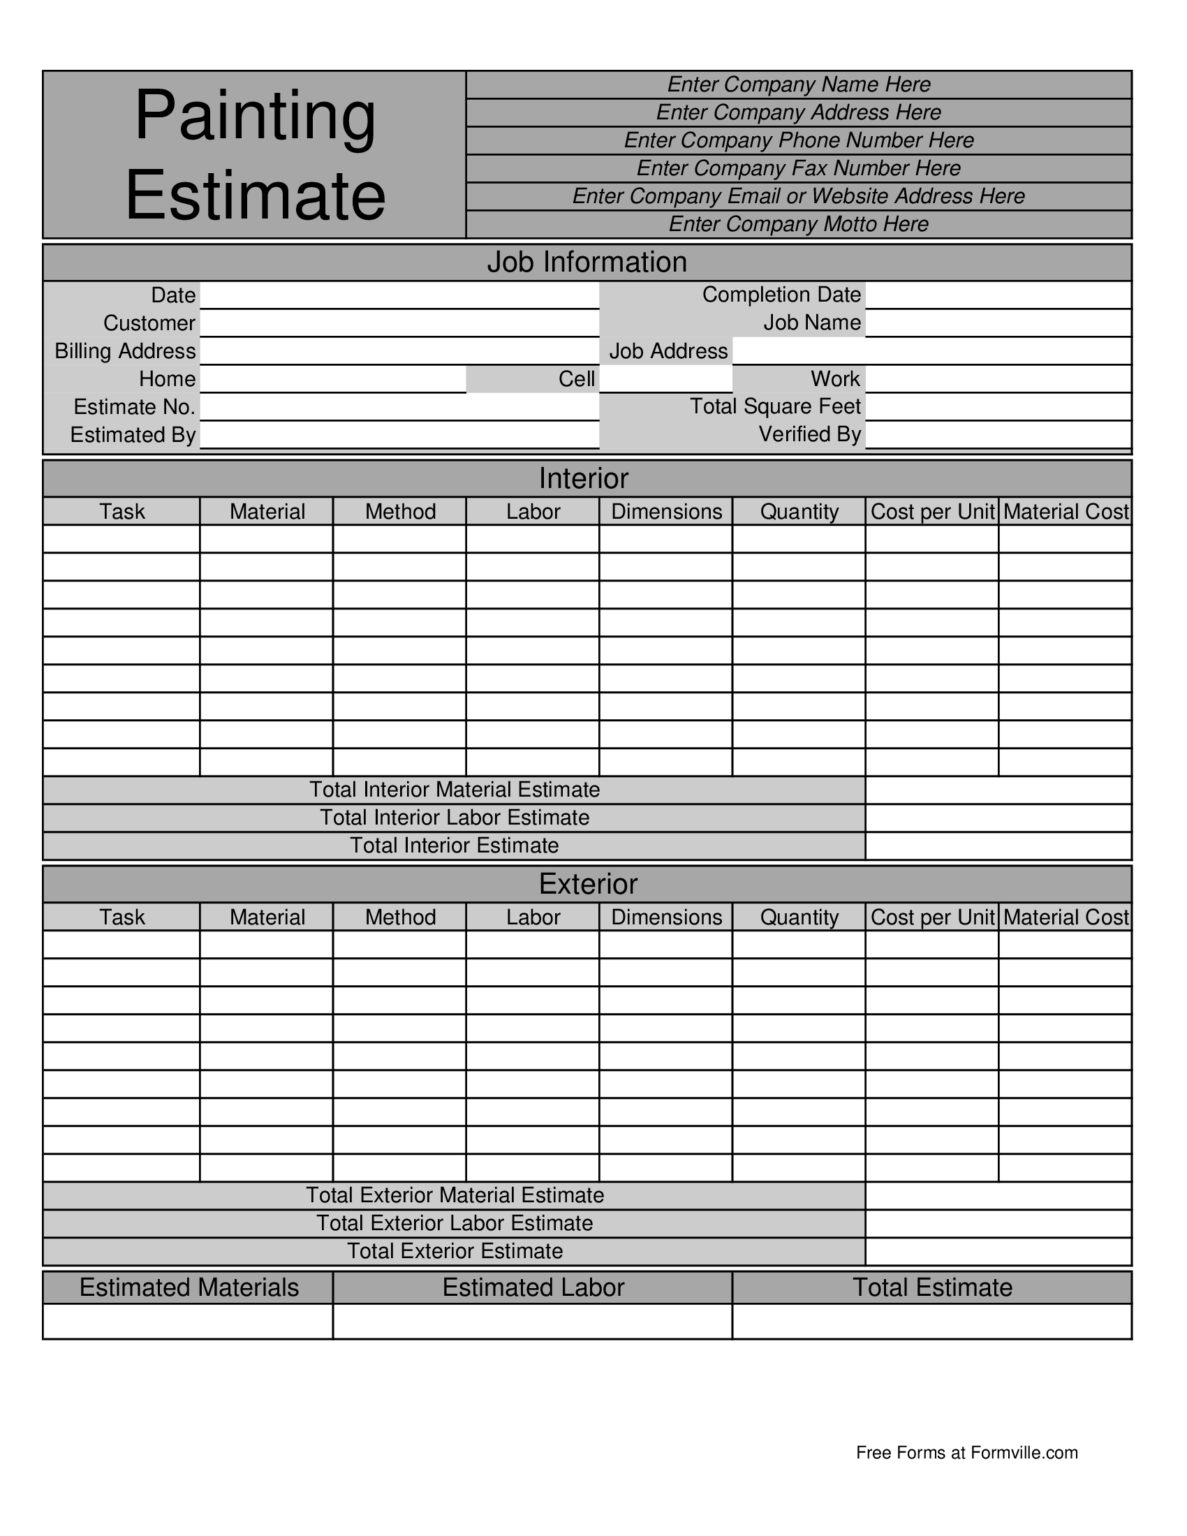 Painting Estimate Template Free